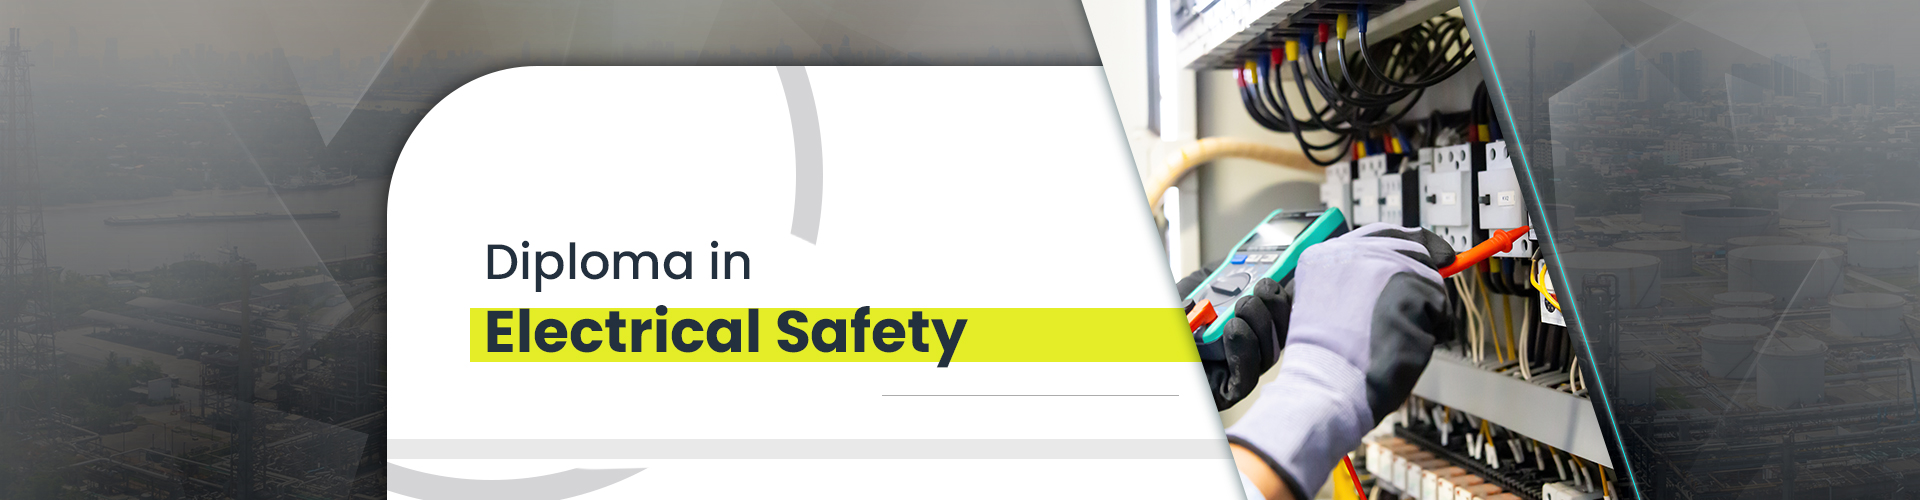 Diploma in Electrical Safety